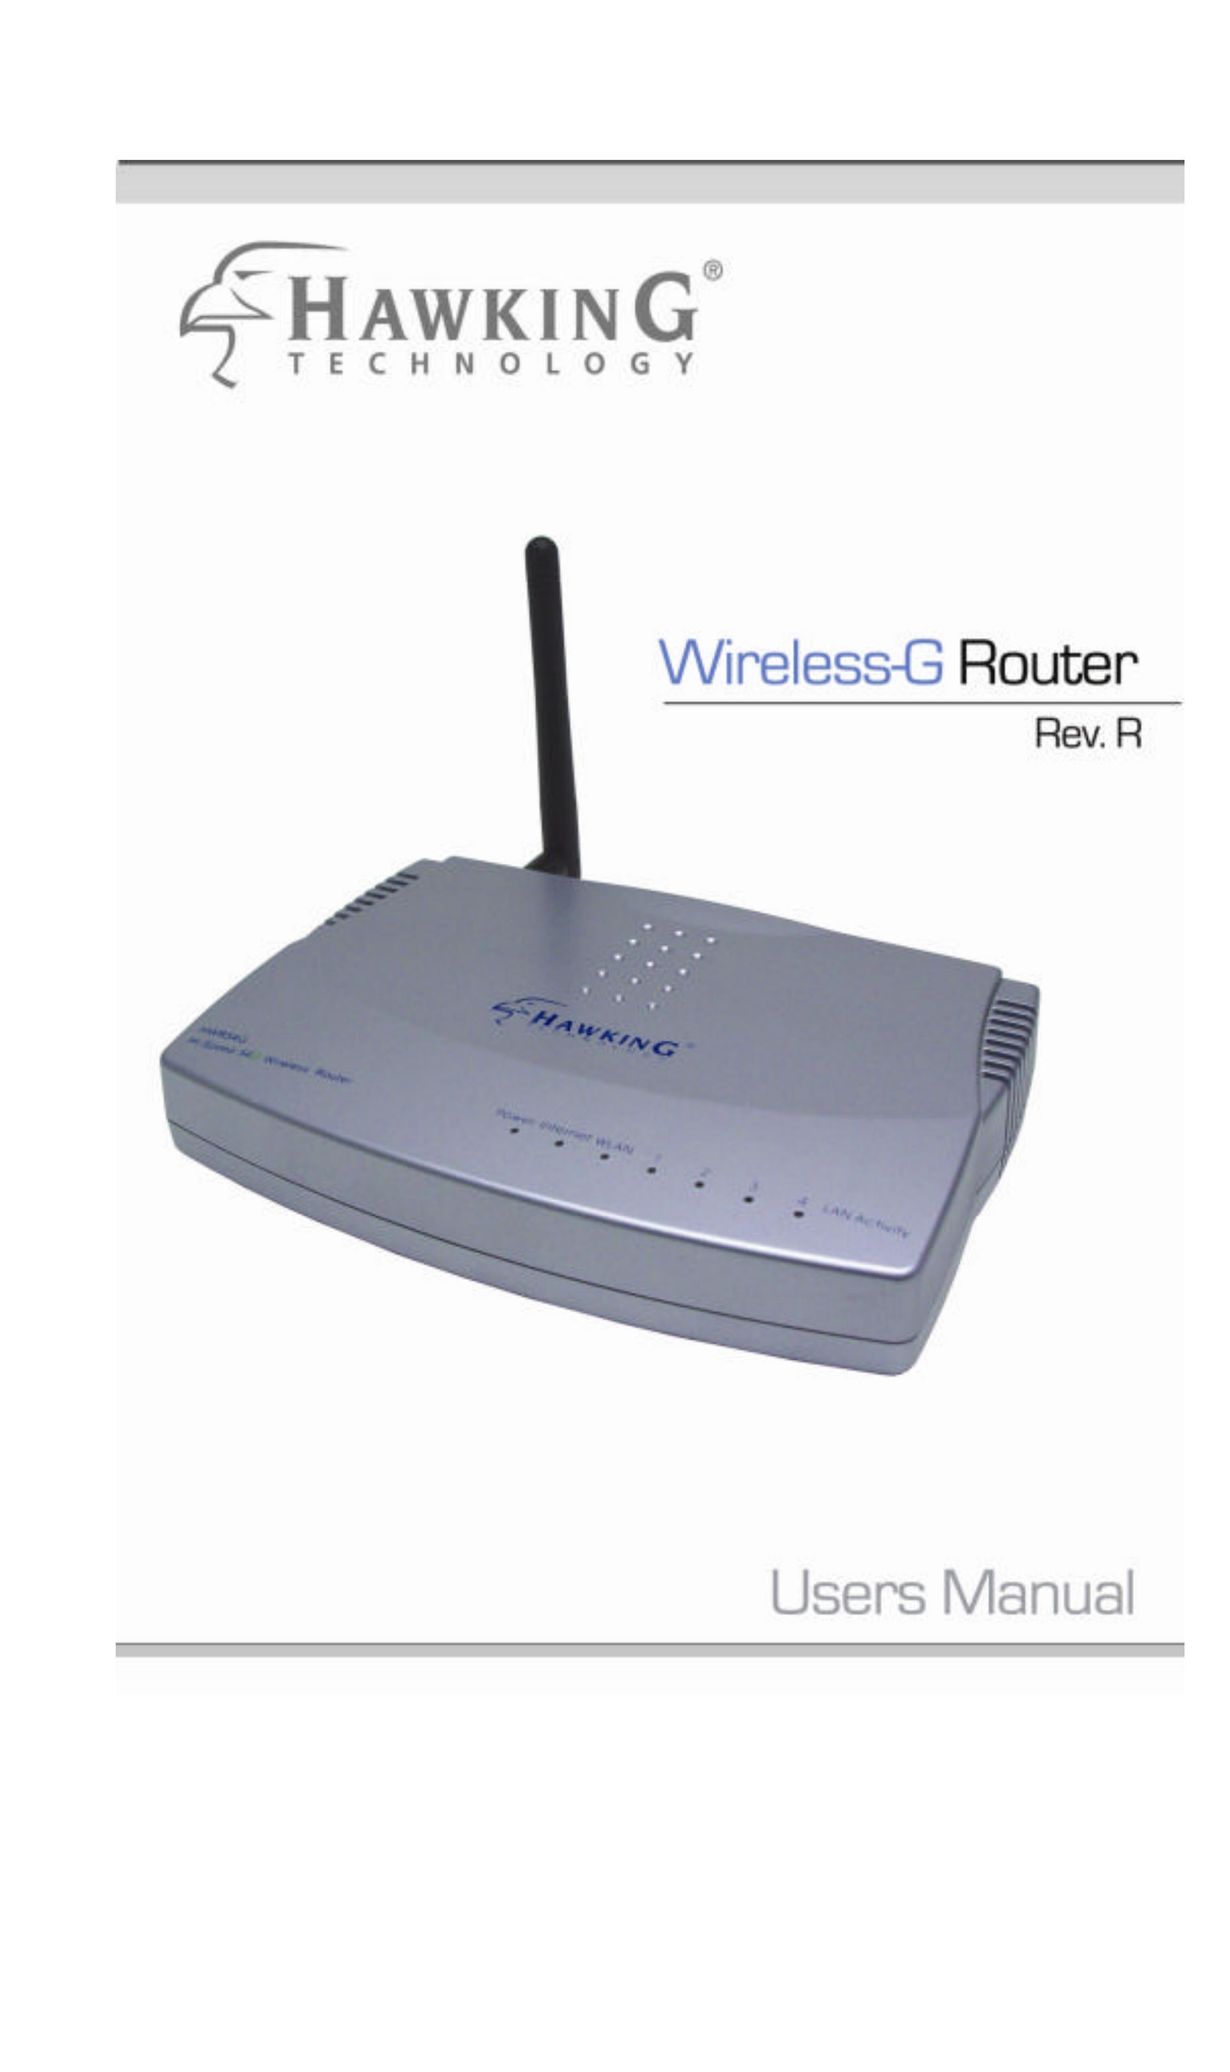 Hawking Technology Wireless-G Router Network Router User Manual